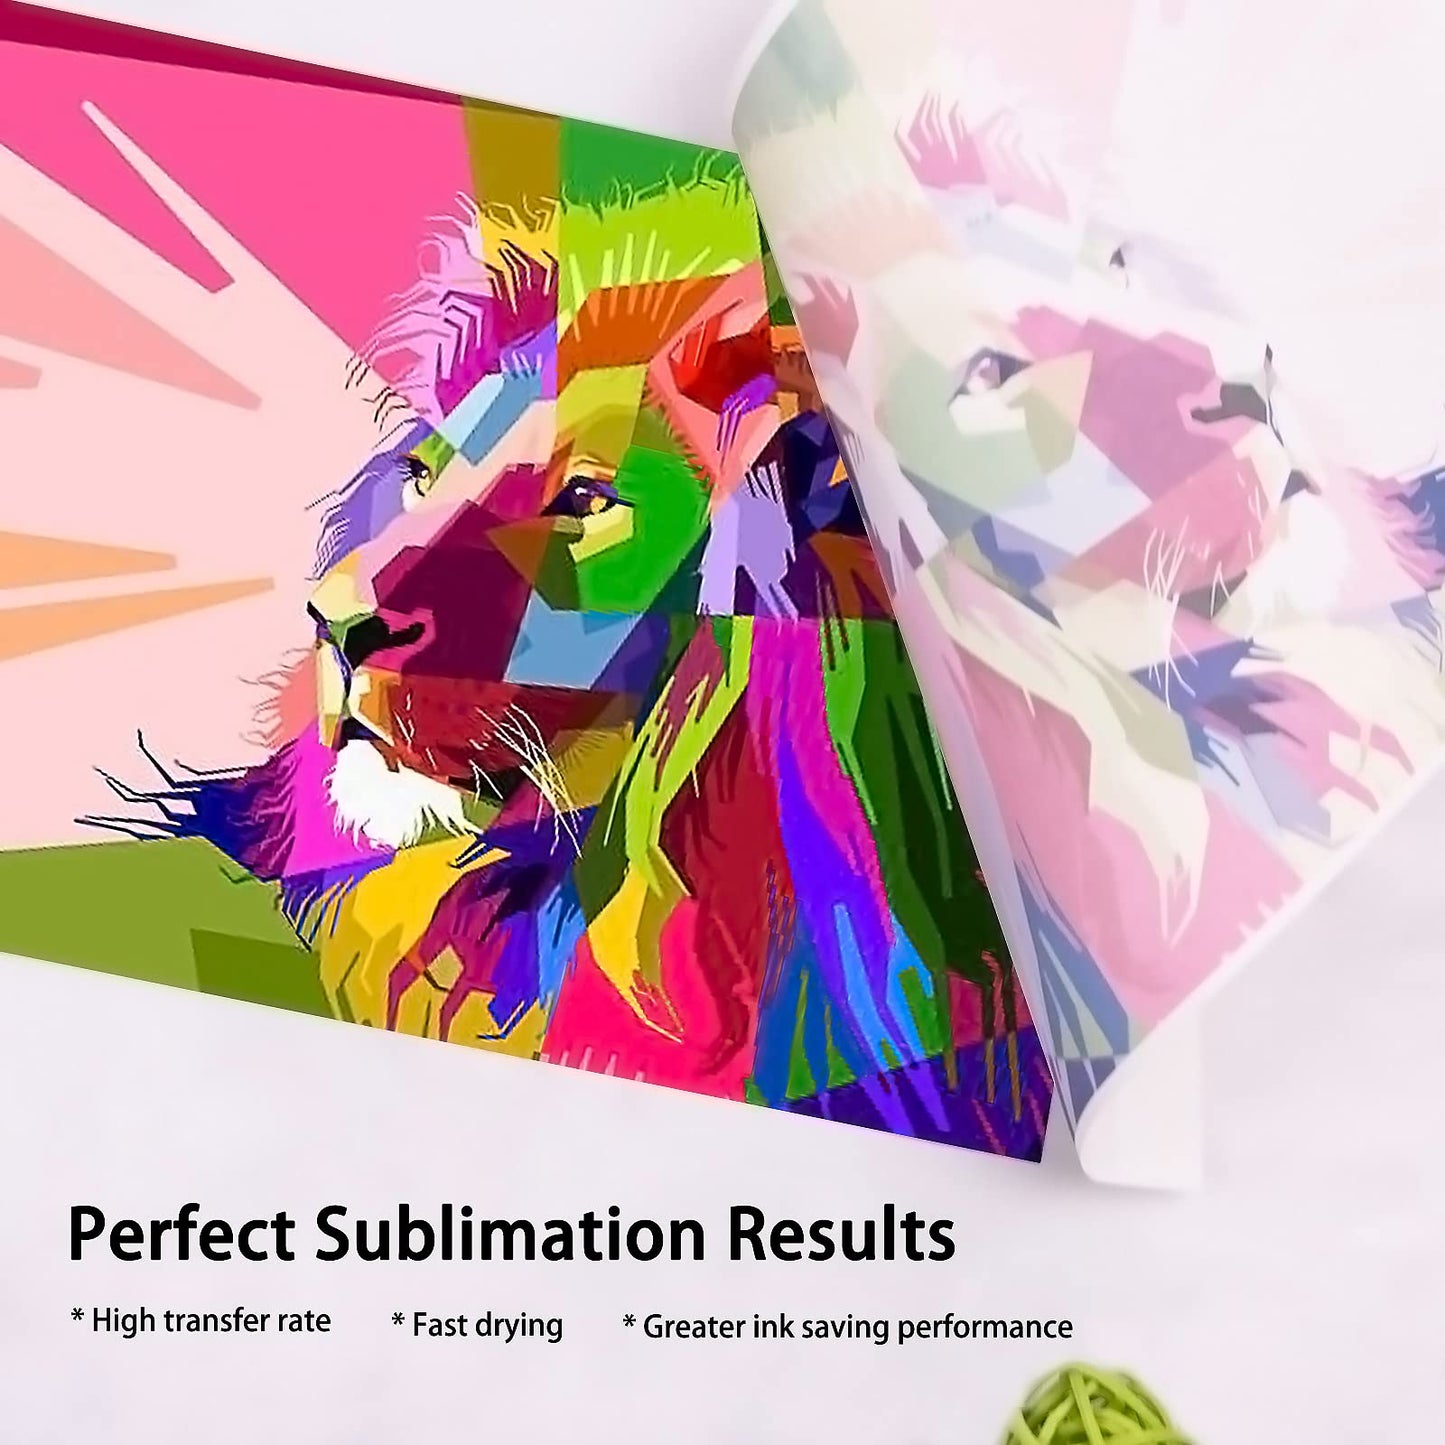 HTVRONT Sublimation Paper 8.5 x 11 inches - 150 Sheets Sublimation Paper Compatible with Inkjet Printer 120gsm…